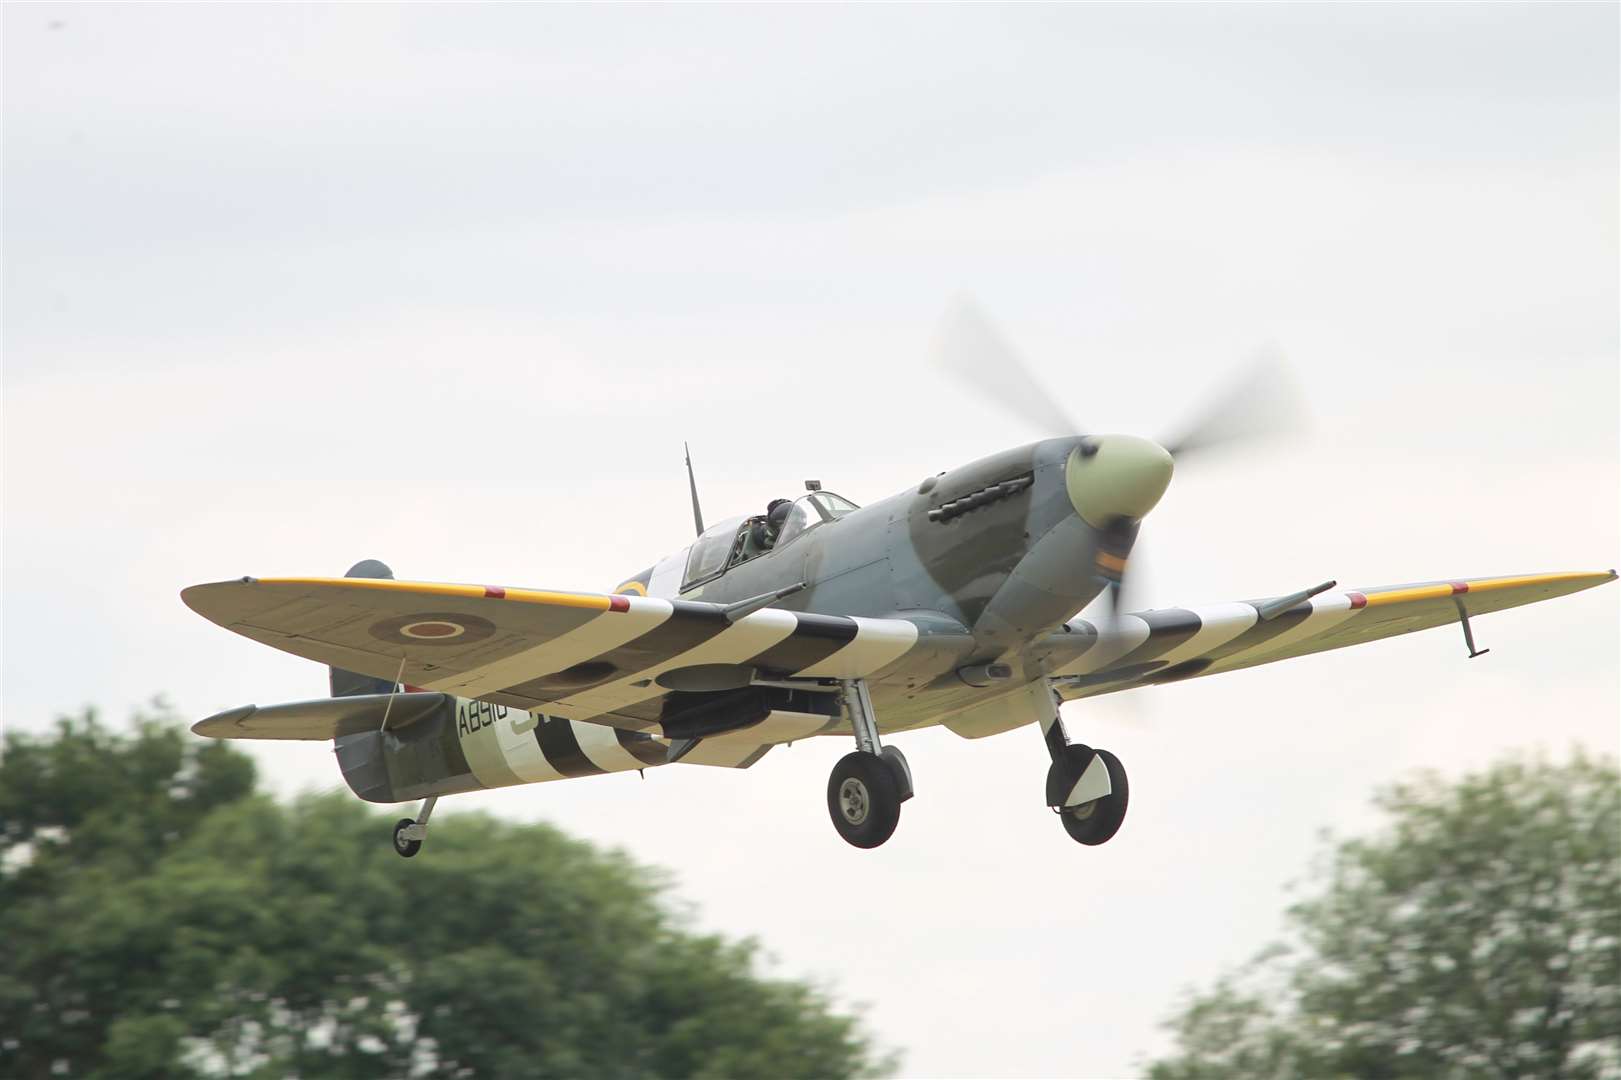 A Spitfire takes off at Headcorn Aerodrome Picture: John Westhrop